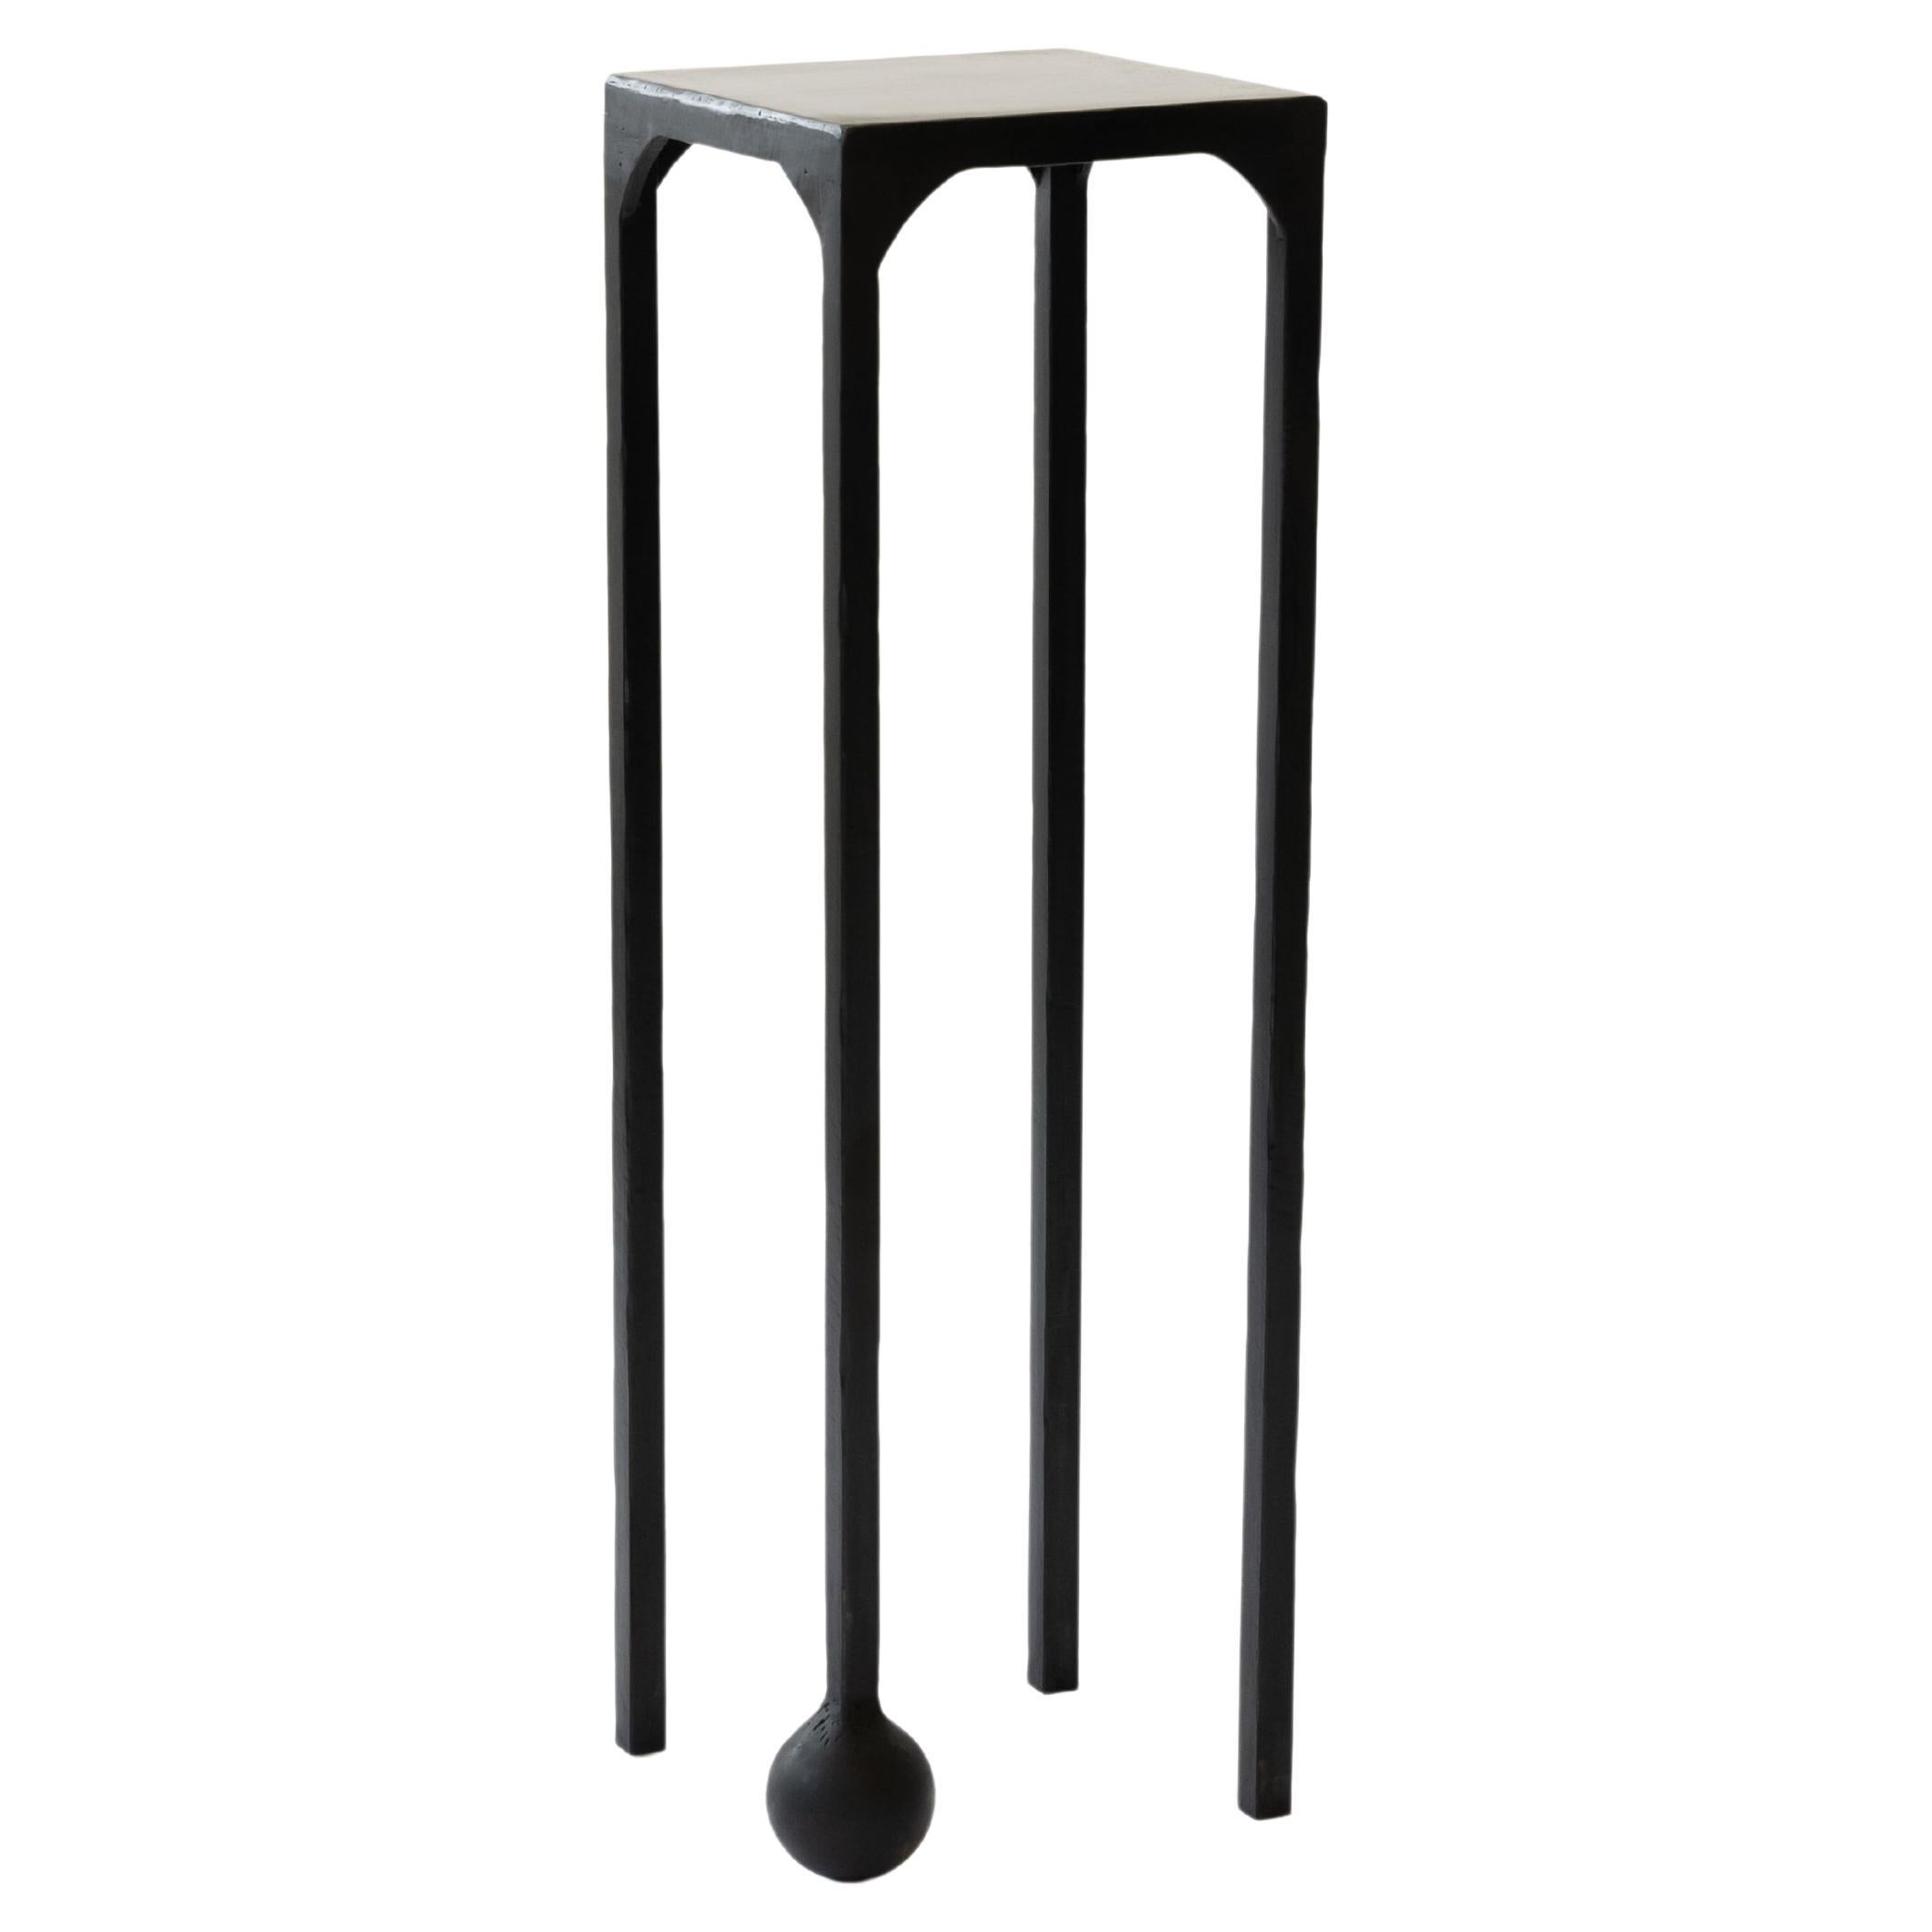 Pedestal Table Modern Dynamic Geometric Handcrafted Blackened and Waxed Steel